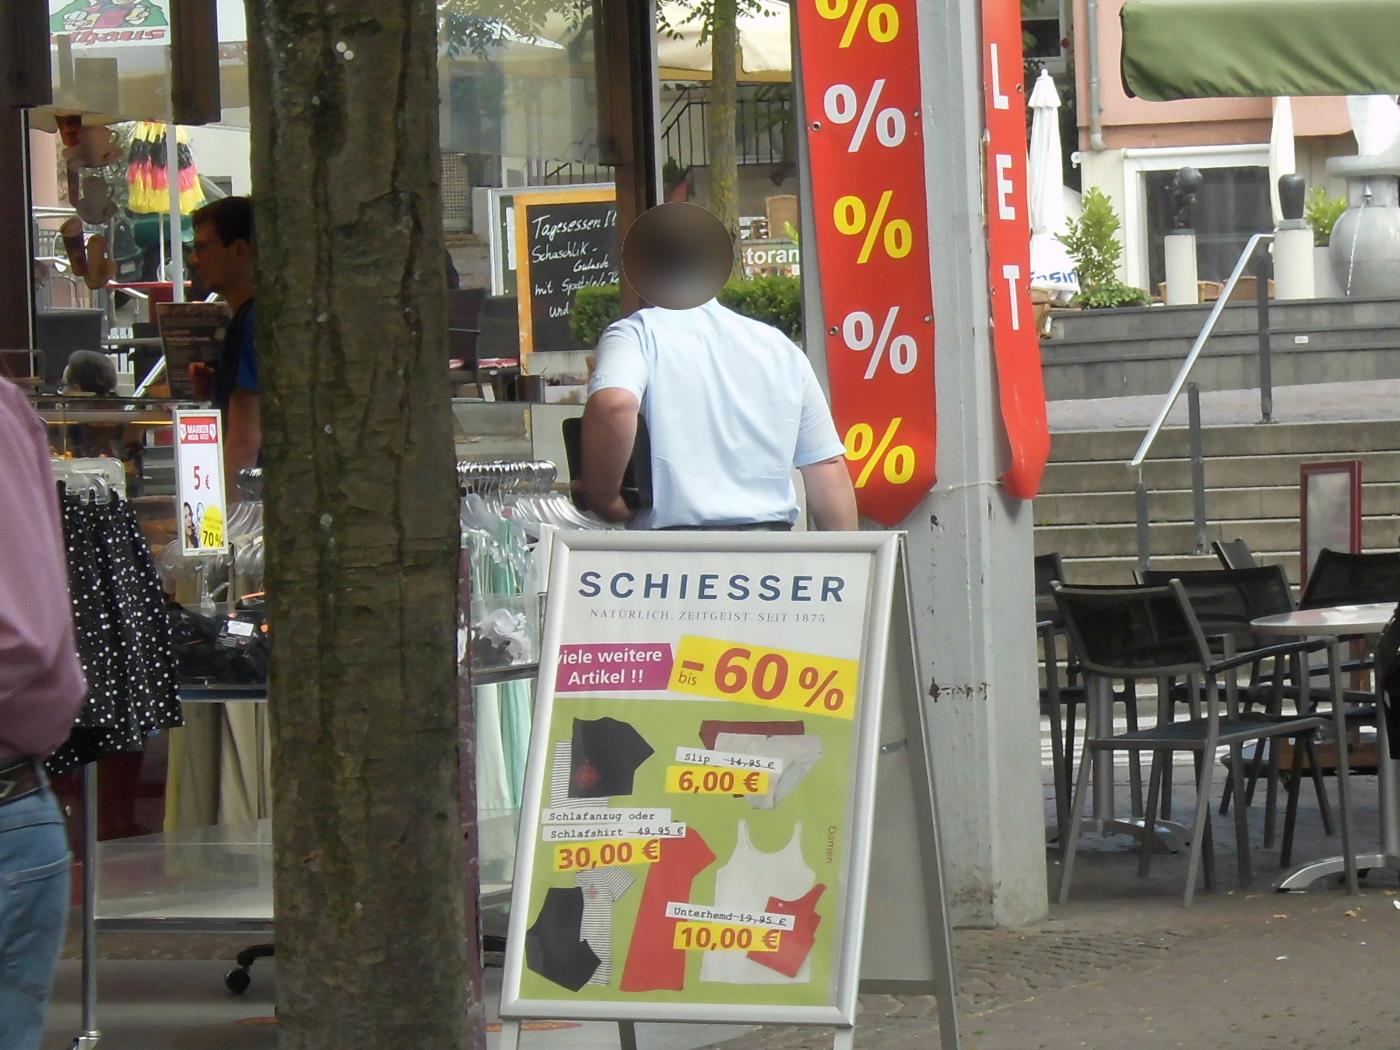 Wiesloch: Jehovah's Witnesses popular and exposed